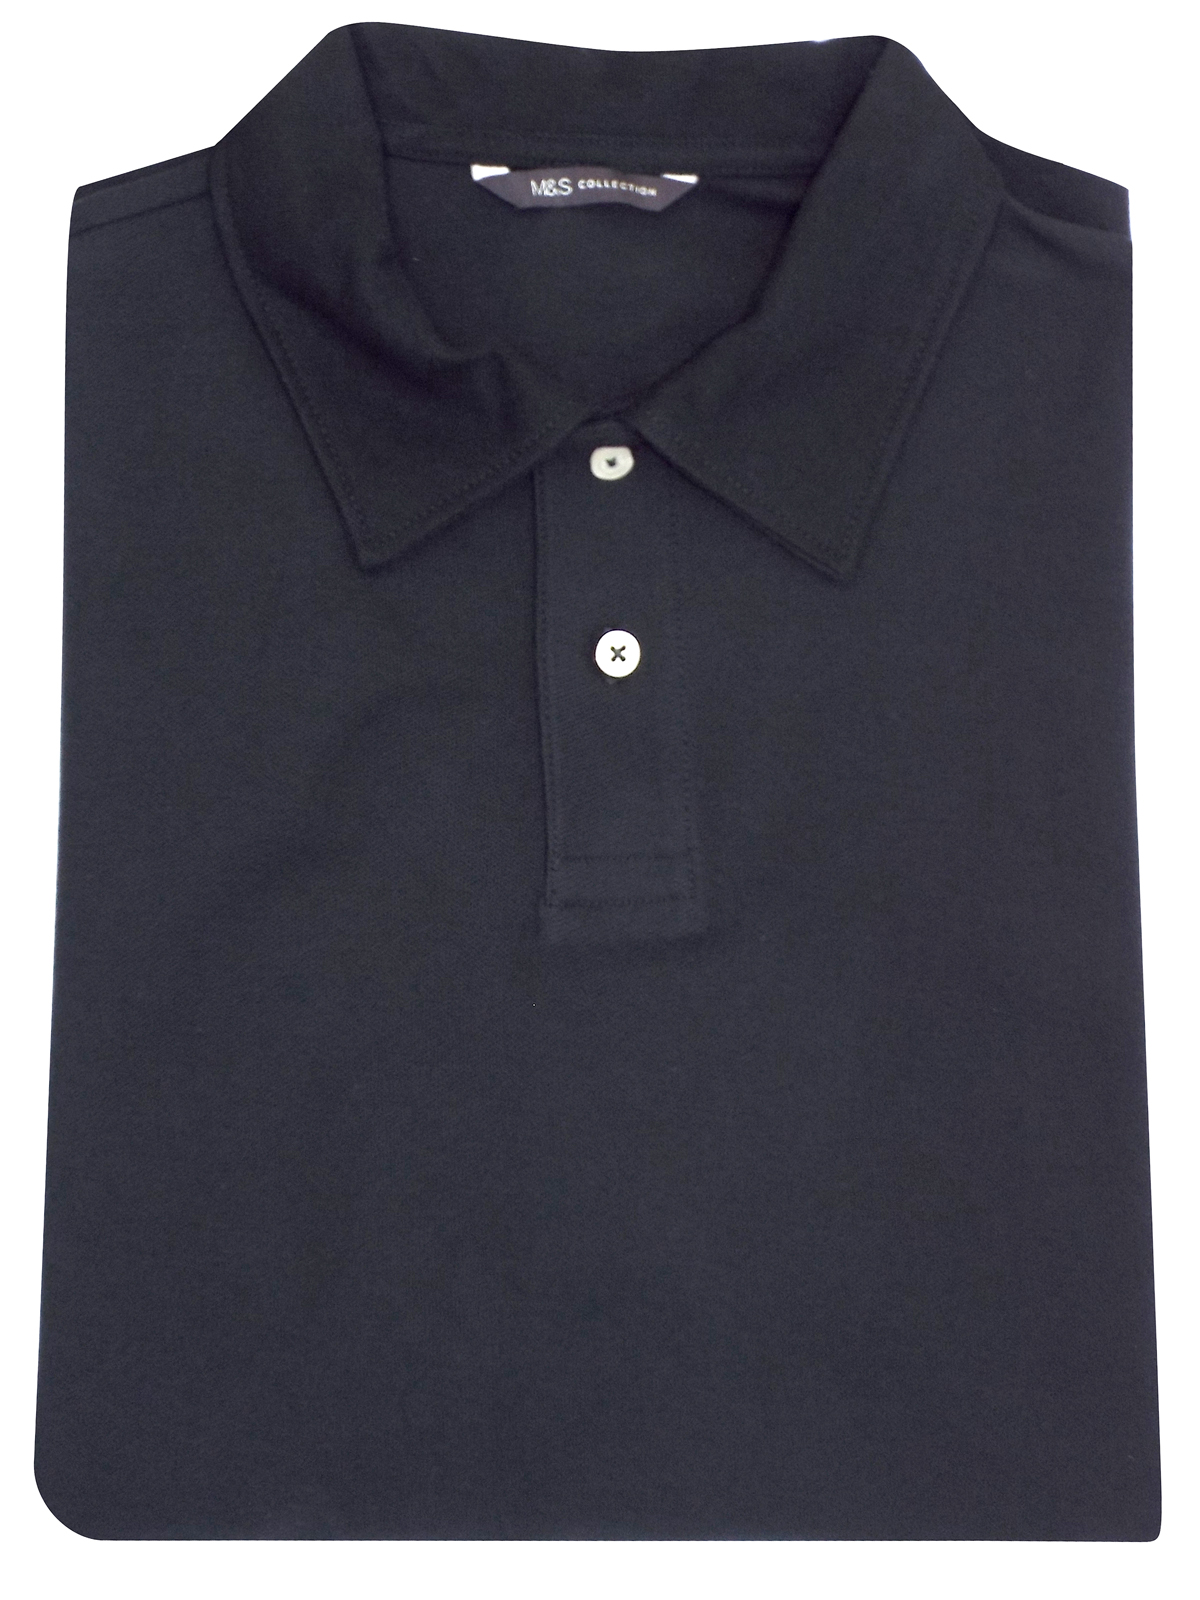 Marks and Spencer - - M&5 BLACK Pure Cotton Polo Shirt - Size Medium to ...